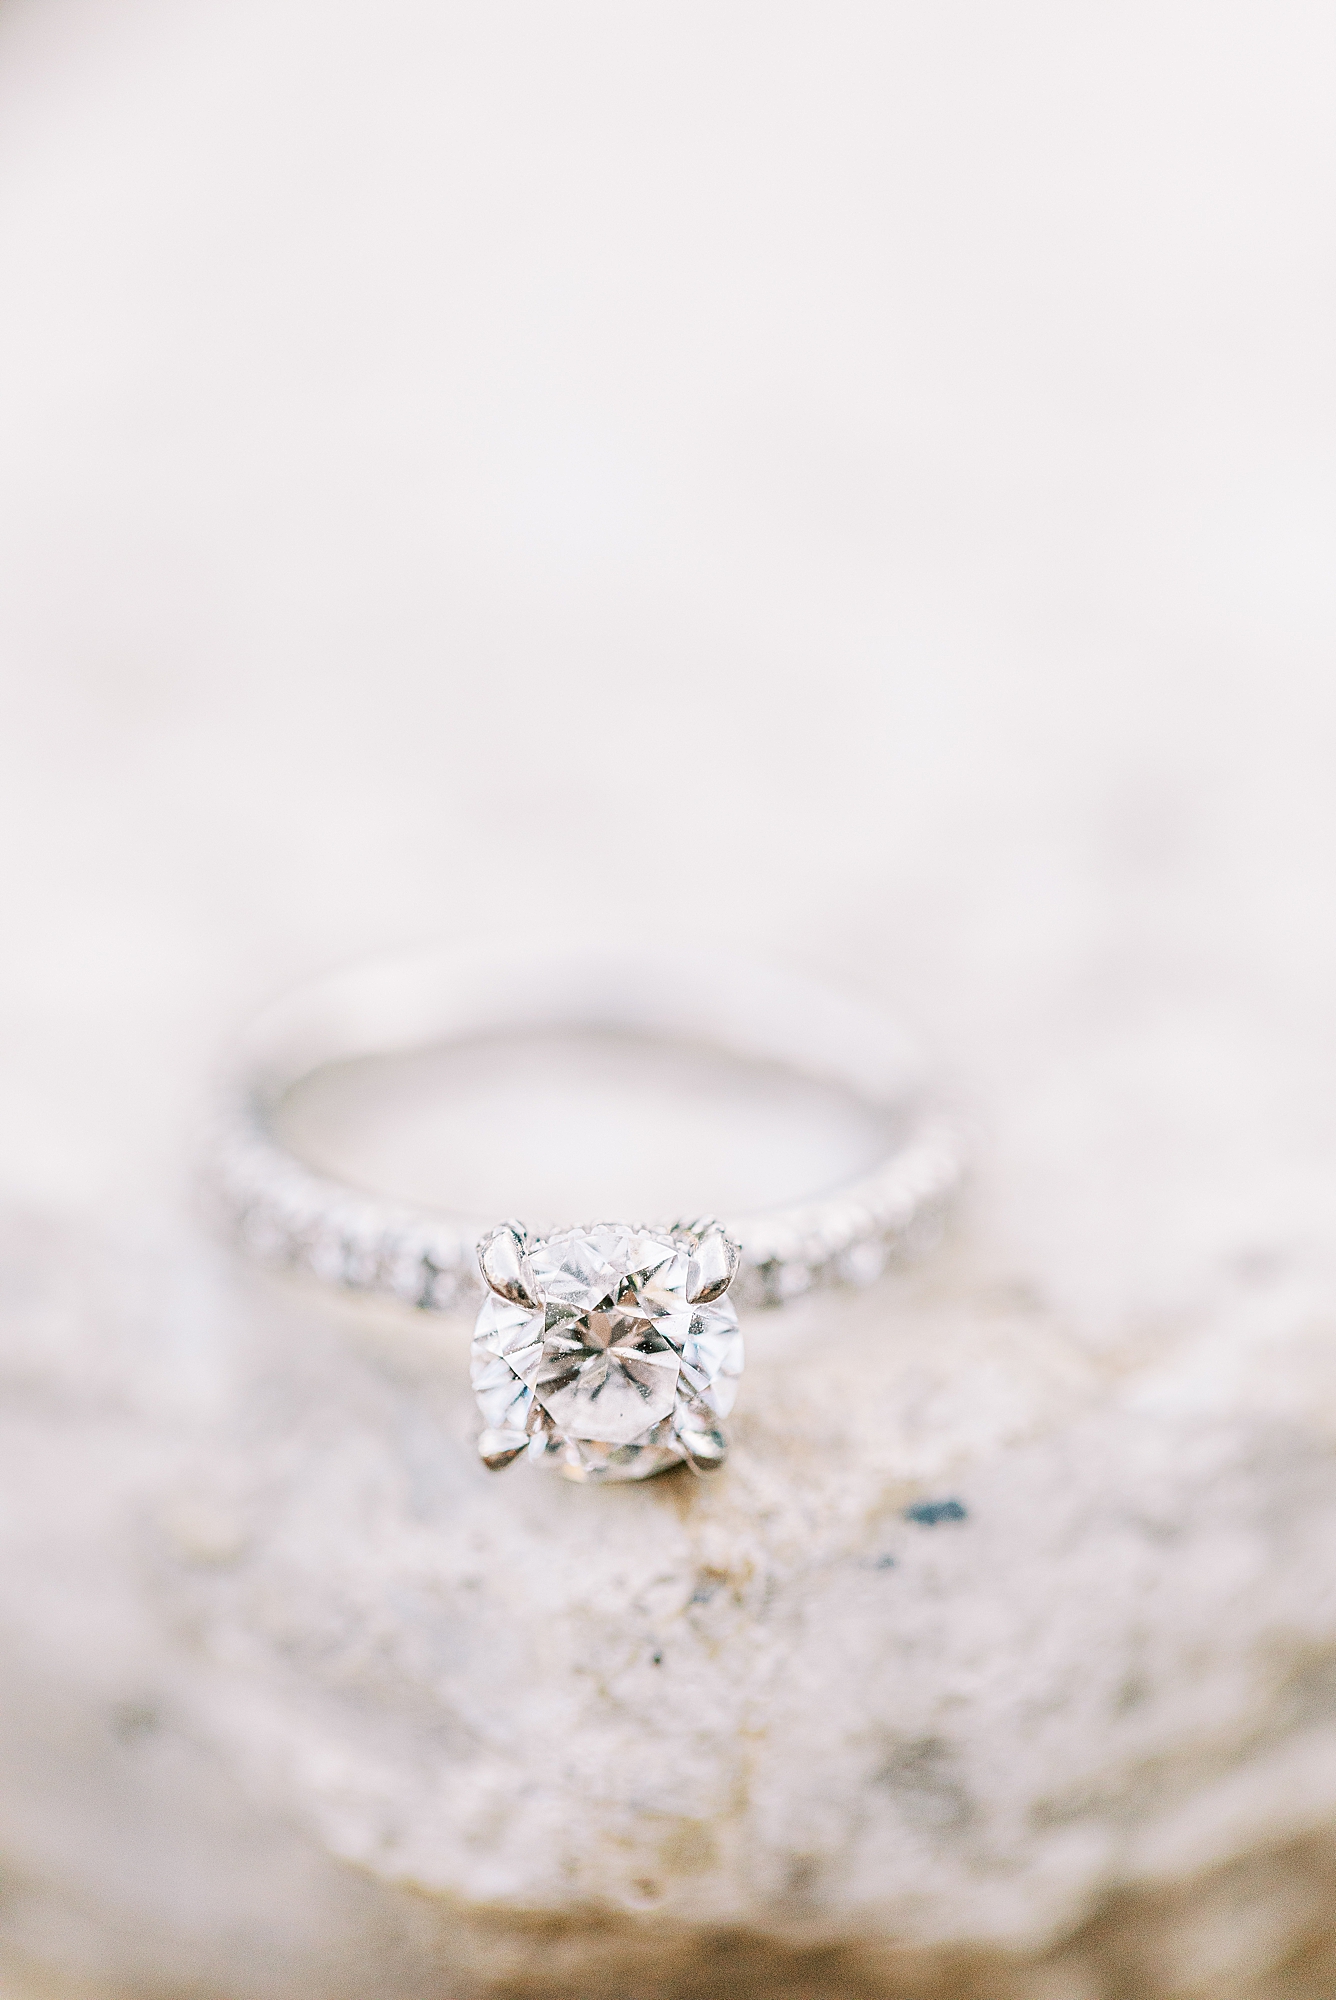 Silver engagement ring with diamond band.